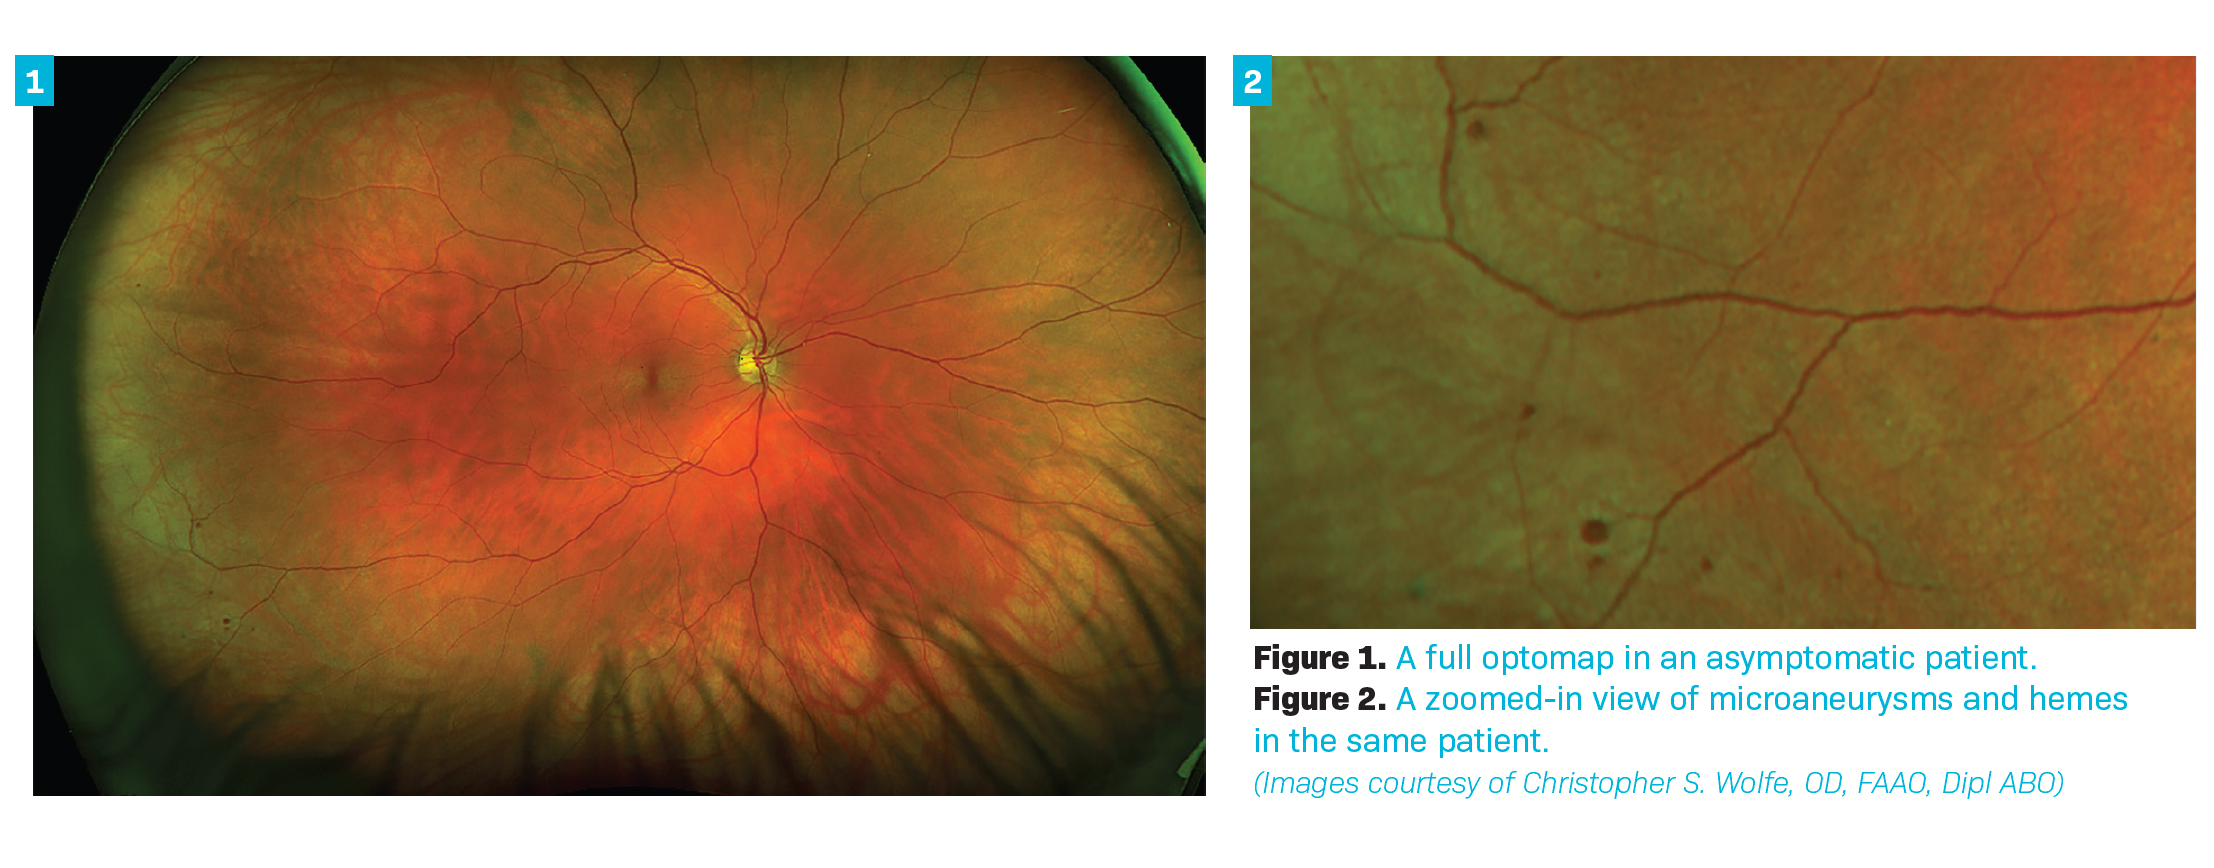 Visualizing periphery is part of a comprehensive eye exam